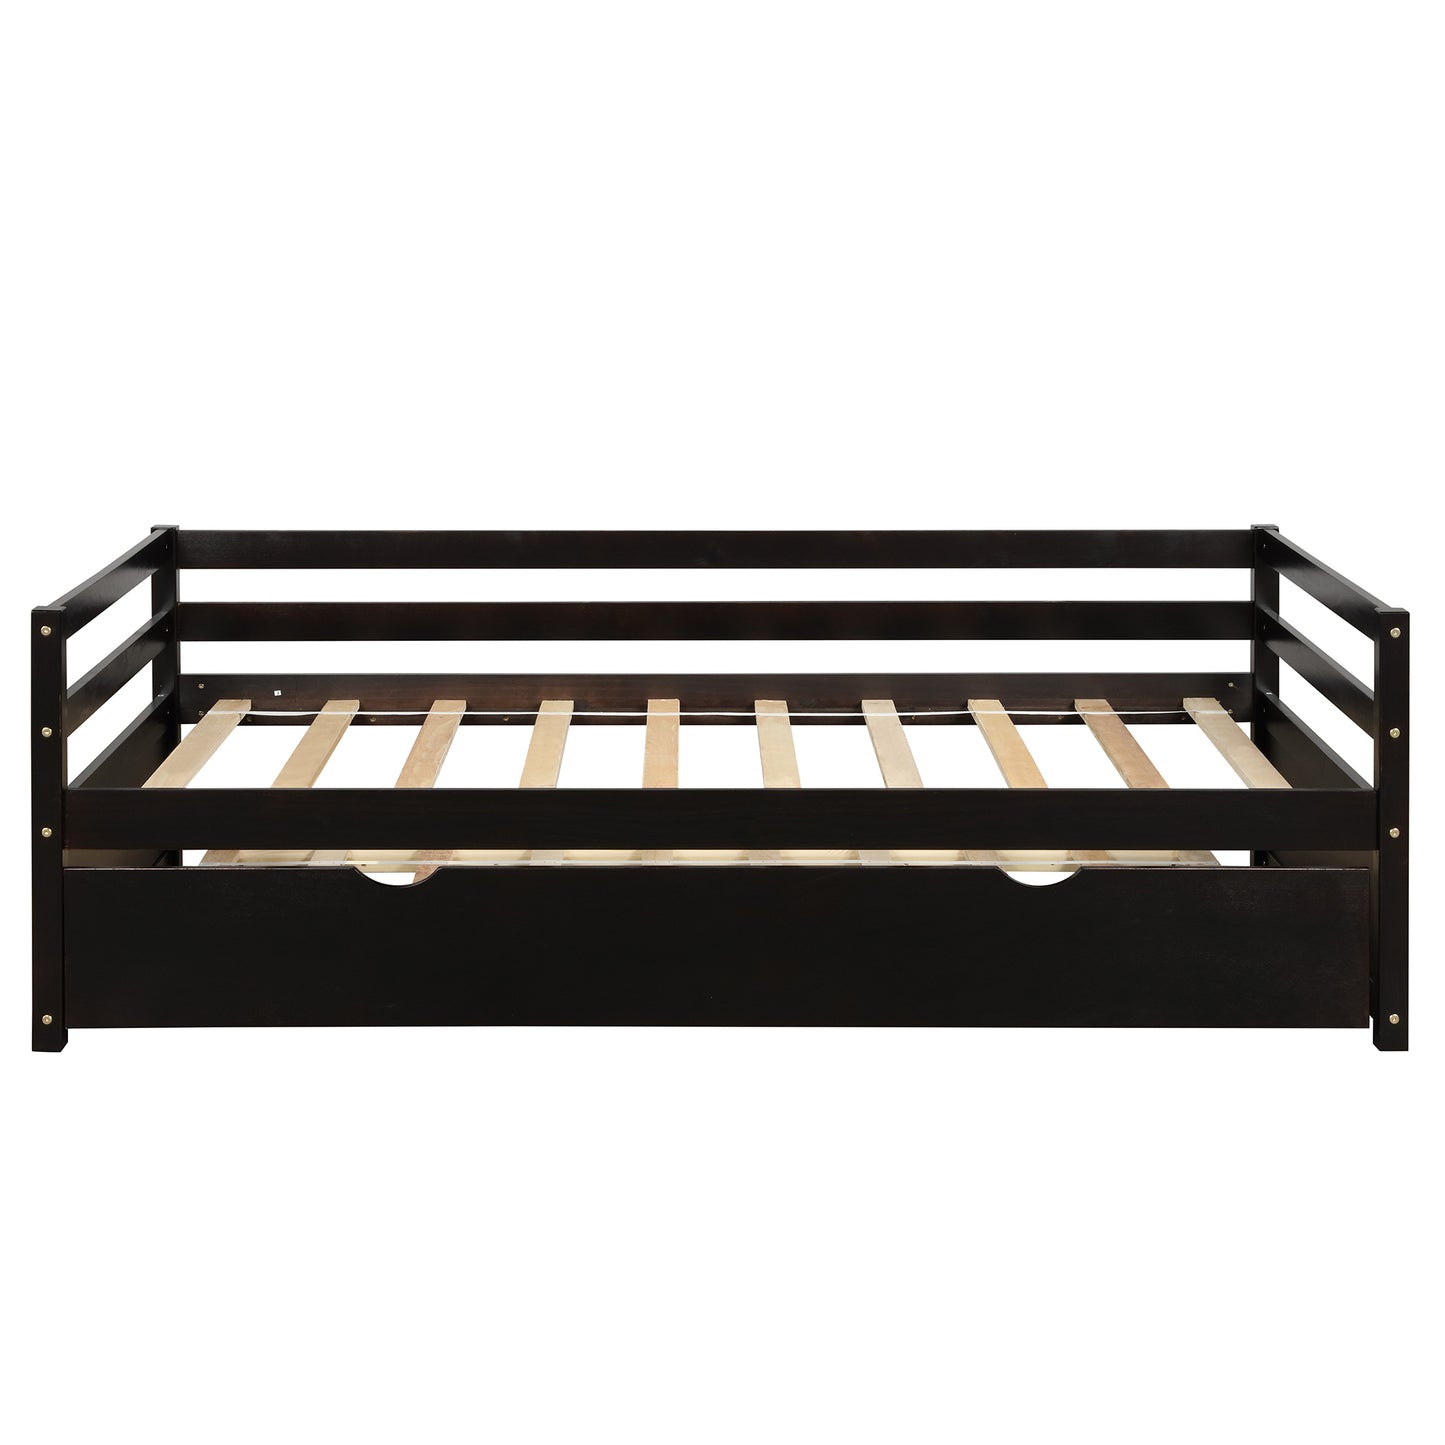 Daybed with Trundle Frame Set, Twin Size, Espresso